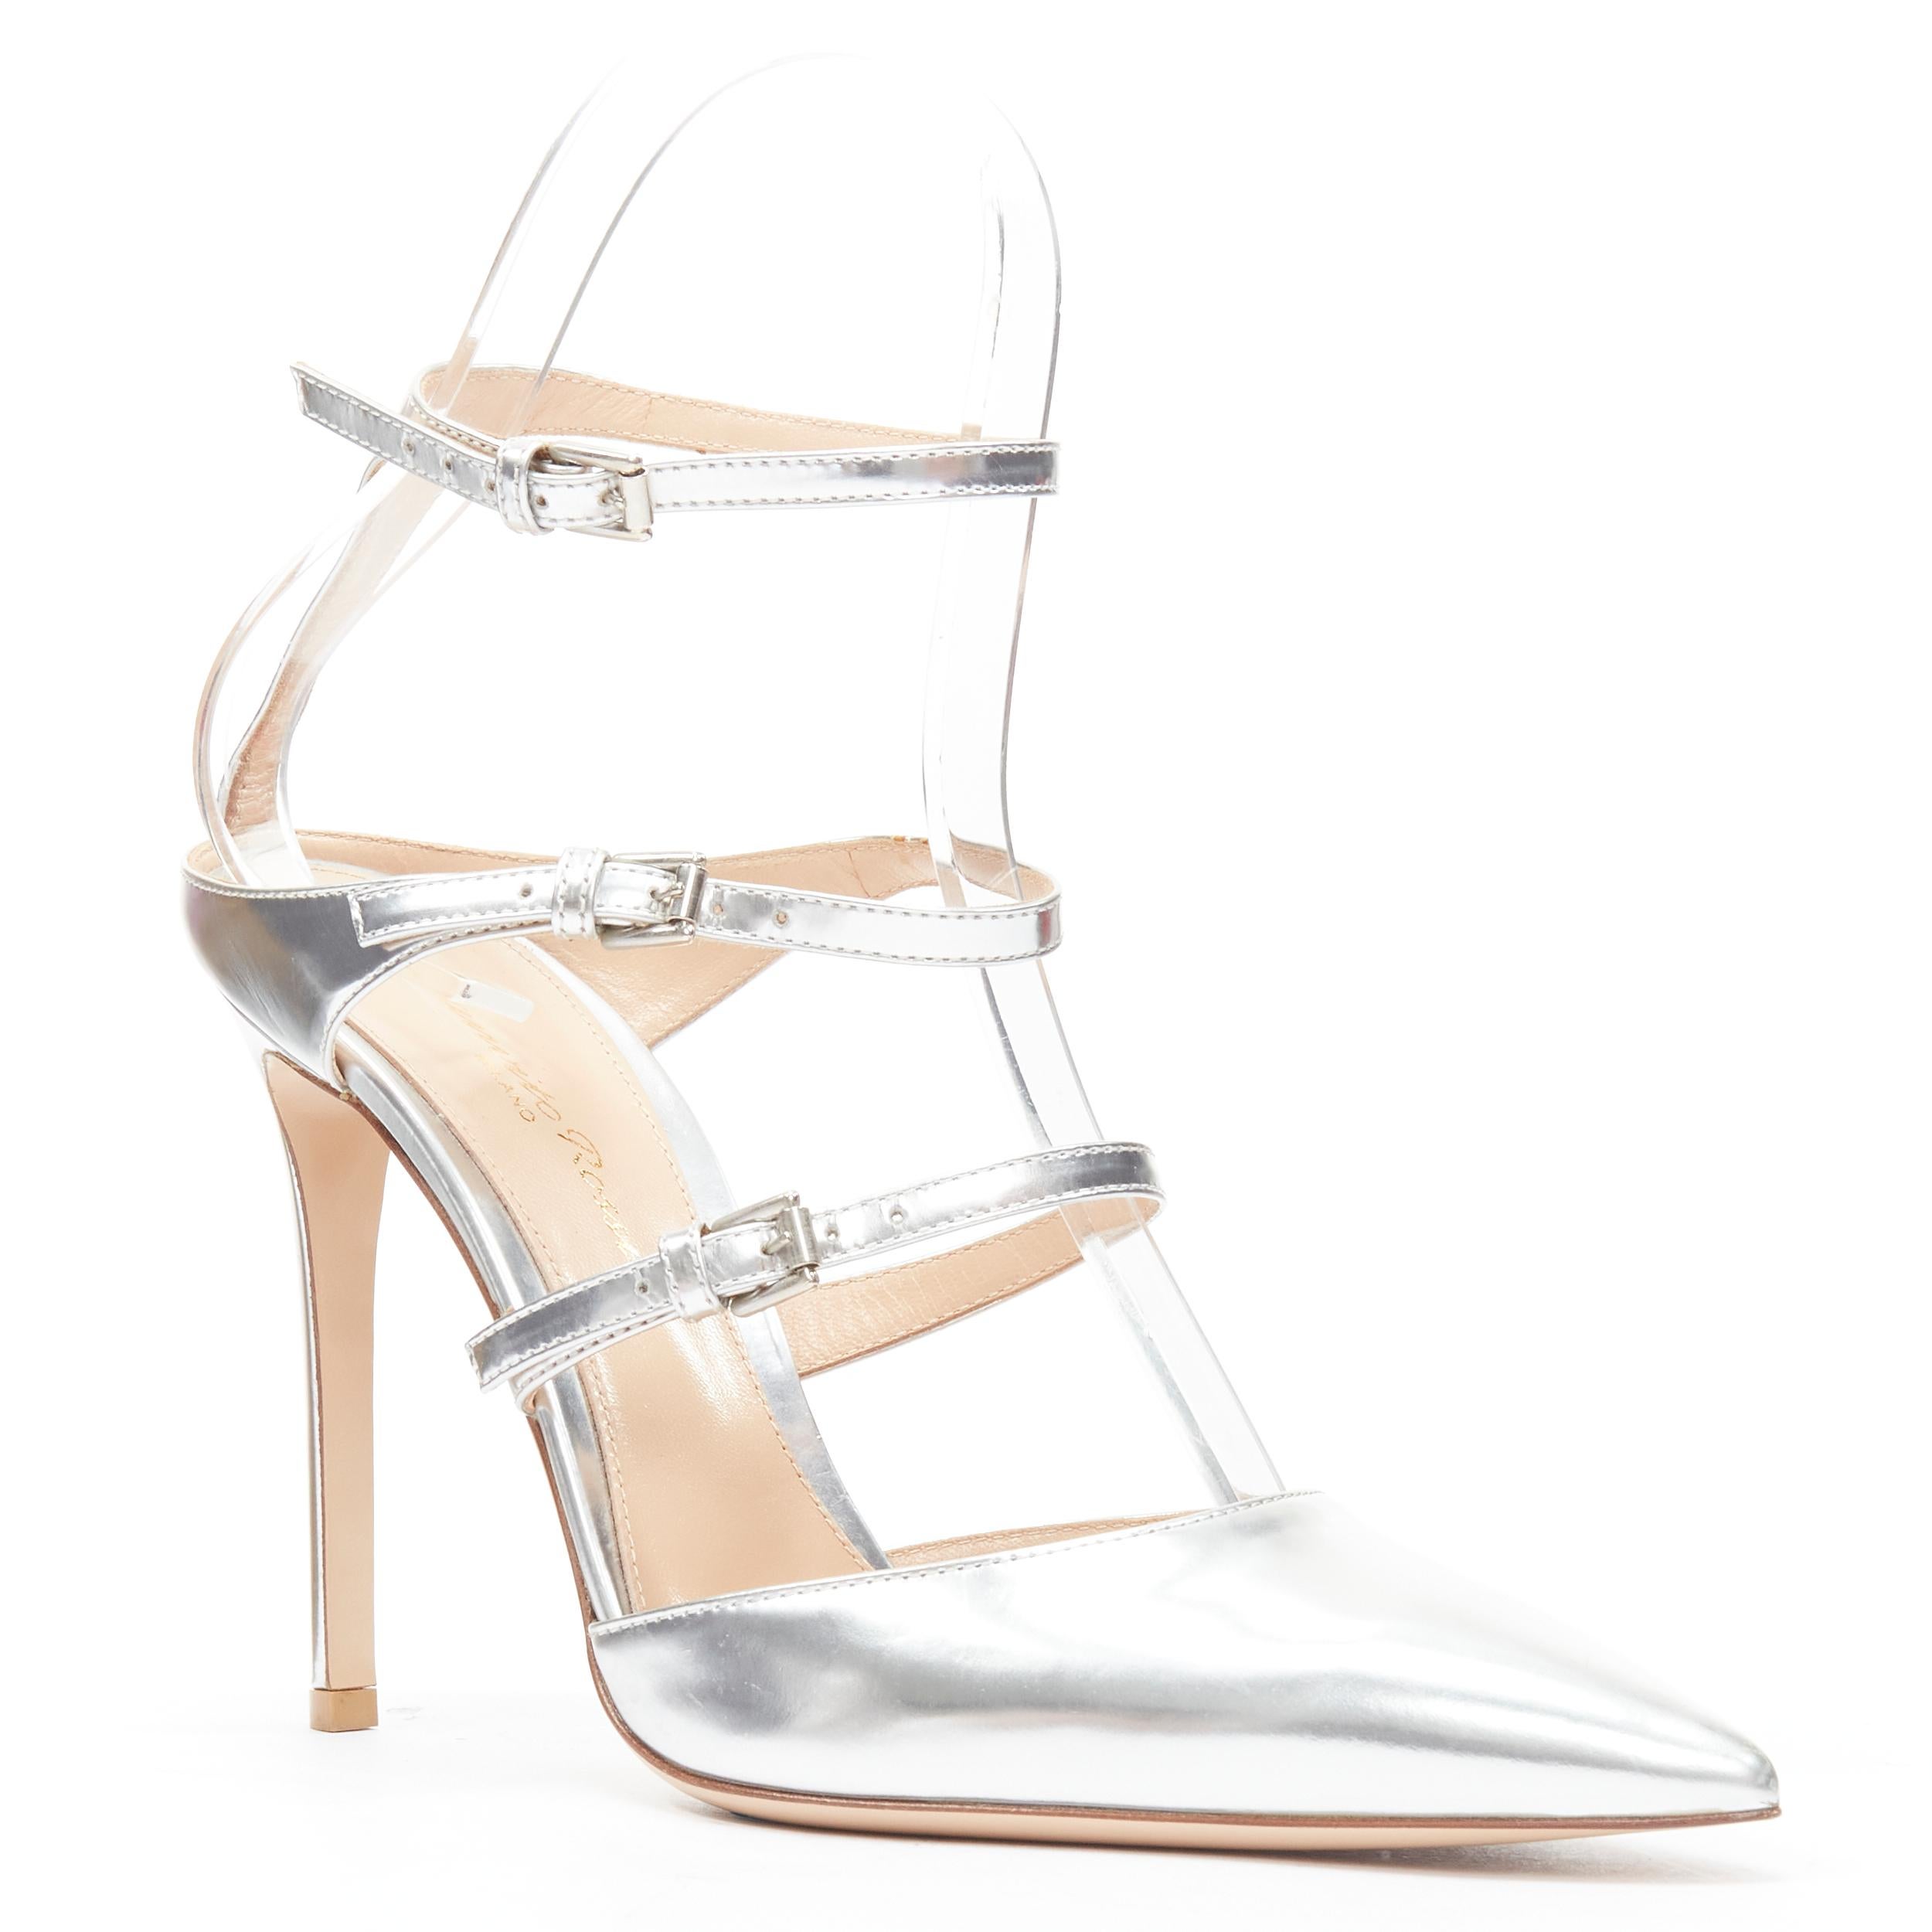 new GIANVITO ROSSI Carey metallic silver leather strappy point toe heel EU38
Reference: MELK/A00218
Brand: Gianvito Rossi
Model: Carey
Material: Leather
Color: Silver
Pattern: Solid
Closure: Buckle
Made in: Italy

CONDITION:
Condition: New without